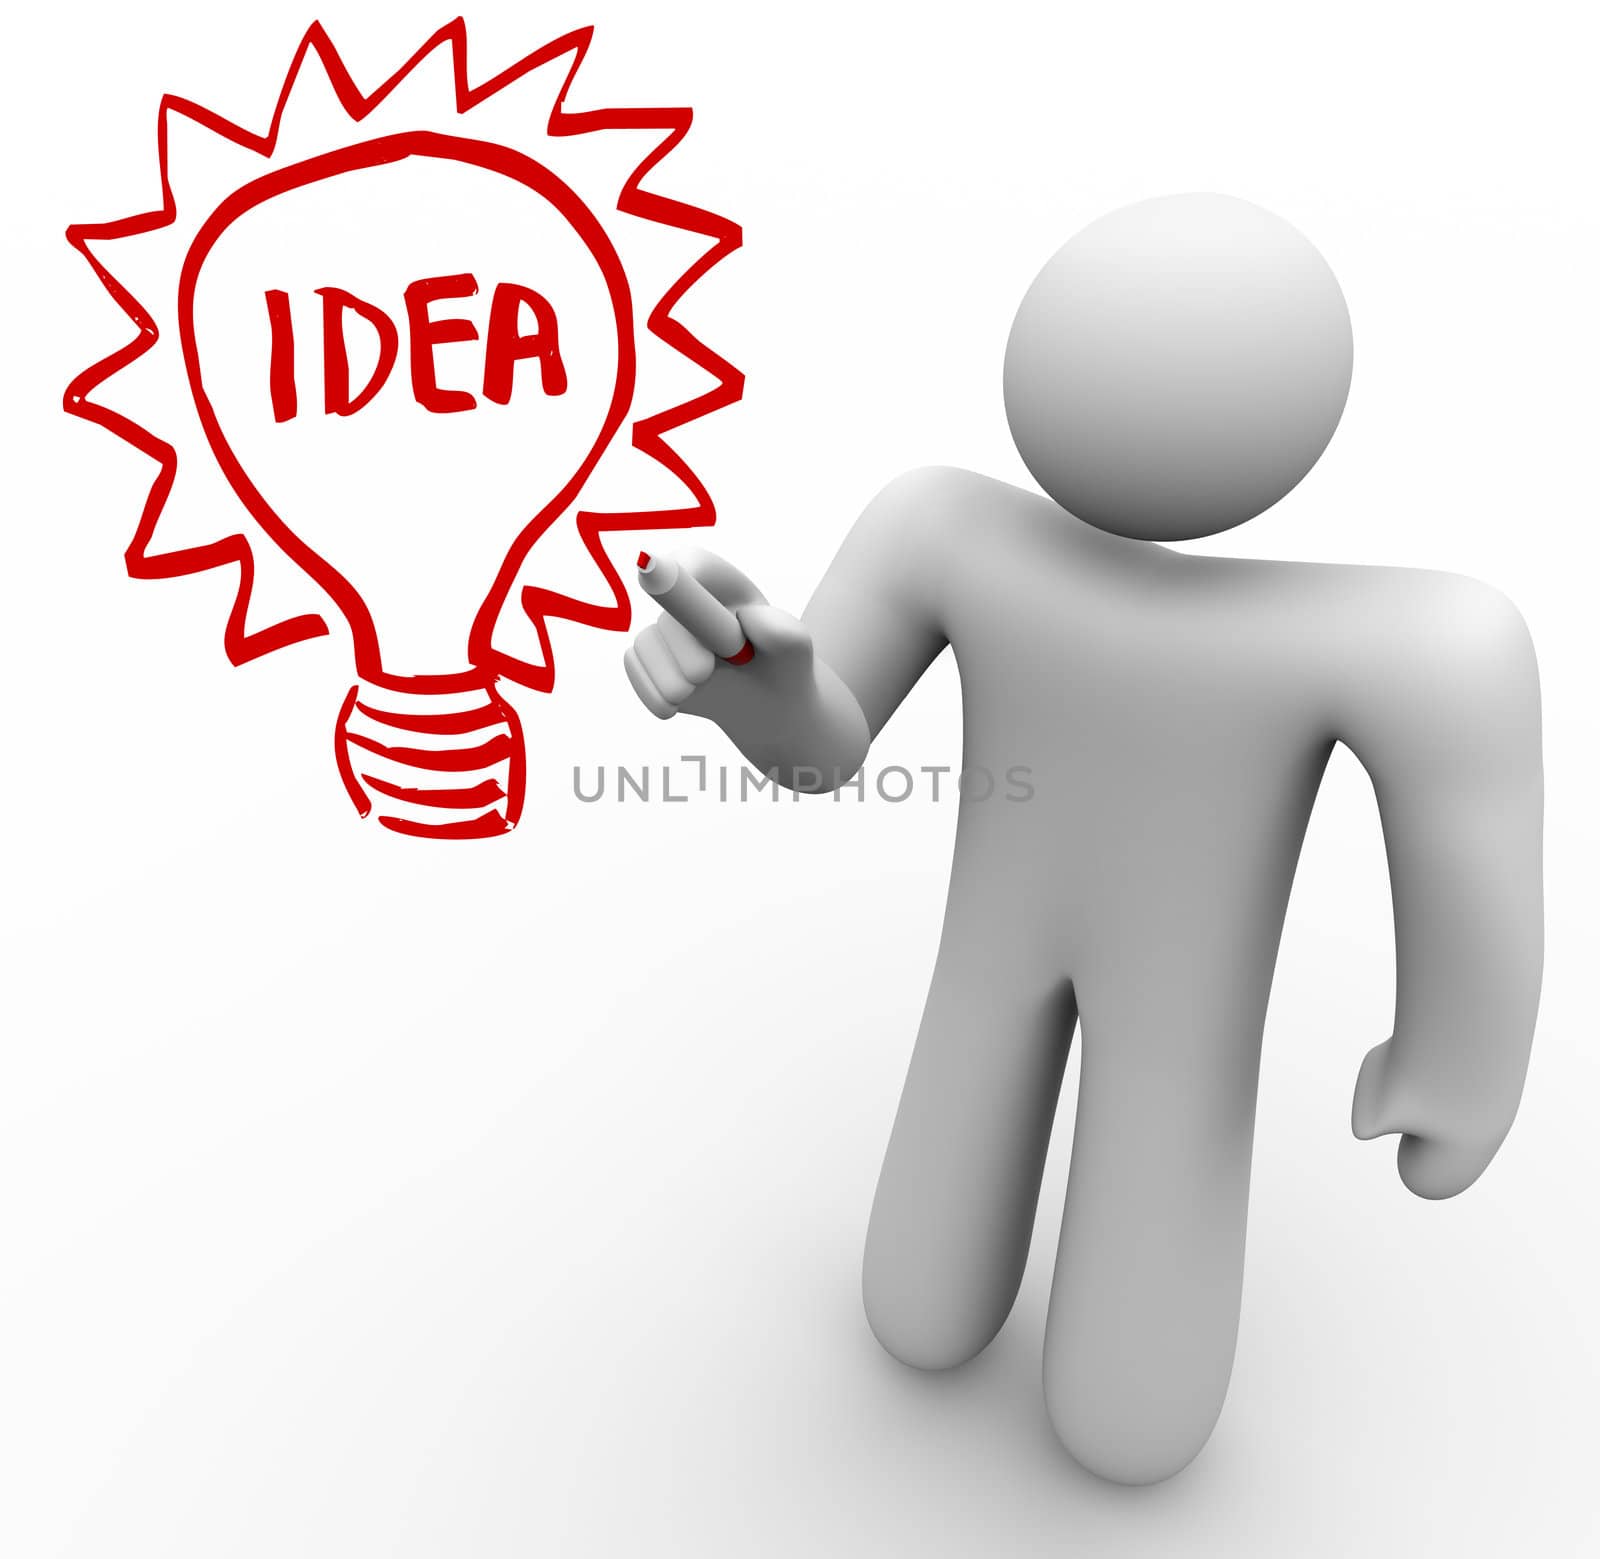 A person stands before a clear glass board and draws a light bulb with the word Idea in it as he brainstorms and thinks of an innovation that solves a problem